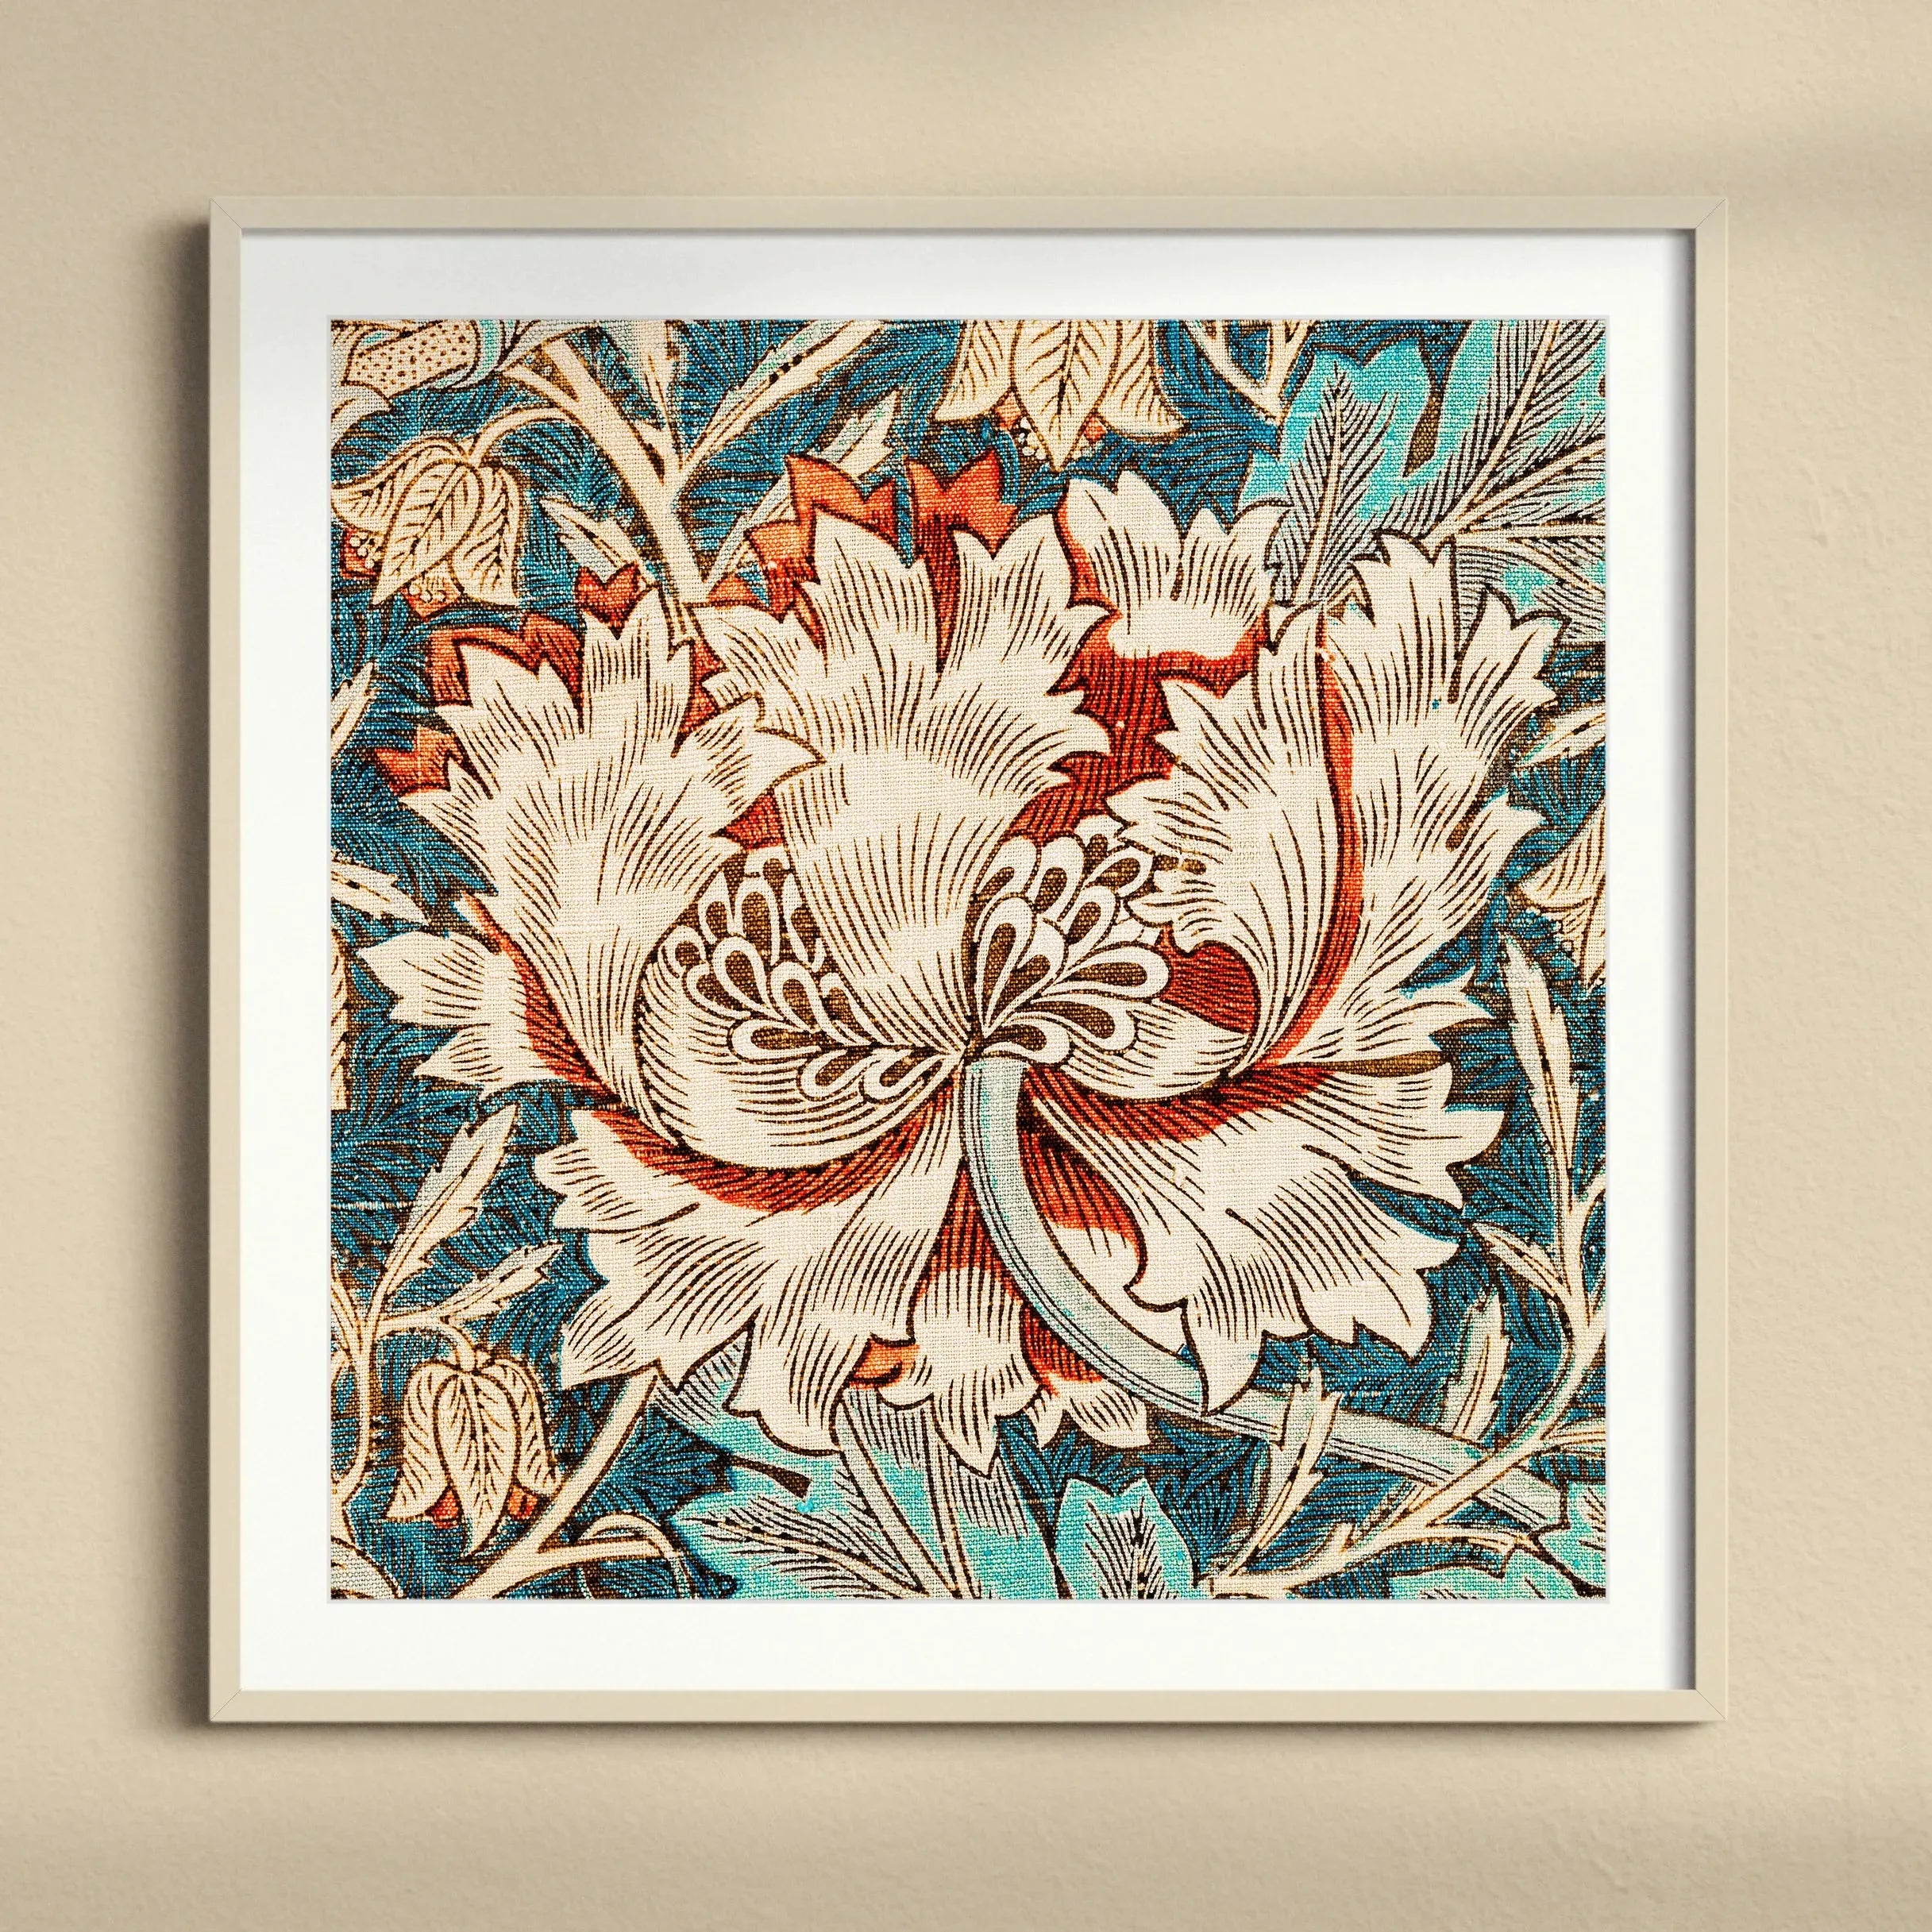 Honeysuckle Too By William Morris Framed & Mounted Print - 12’x12’ / Natural Frame - Posters Prints & Visual